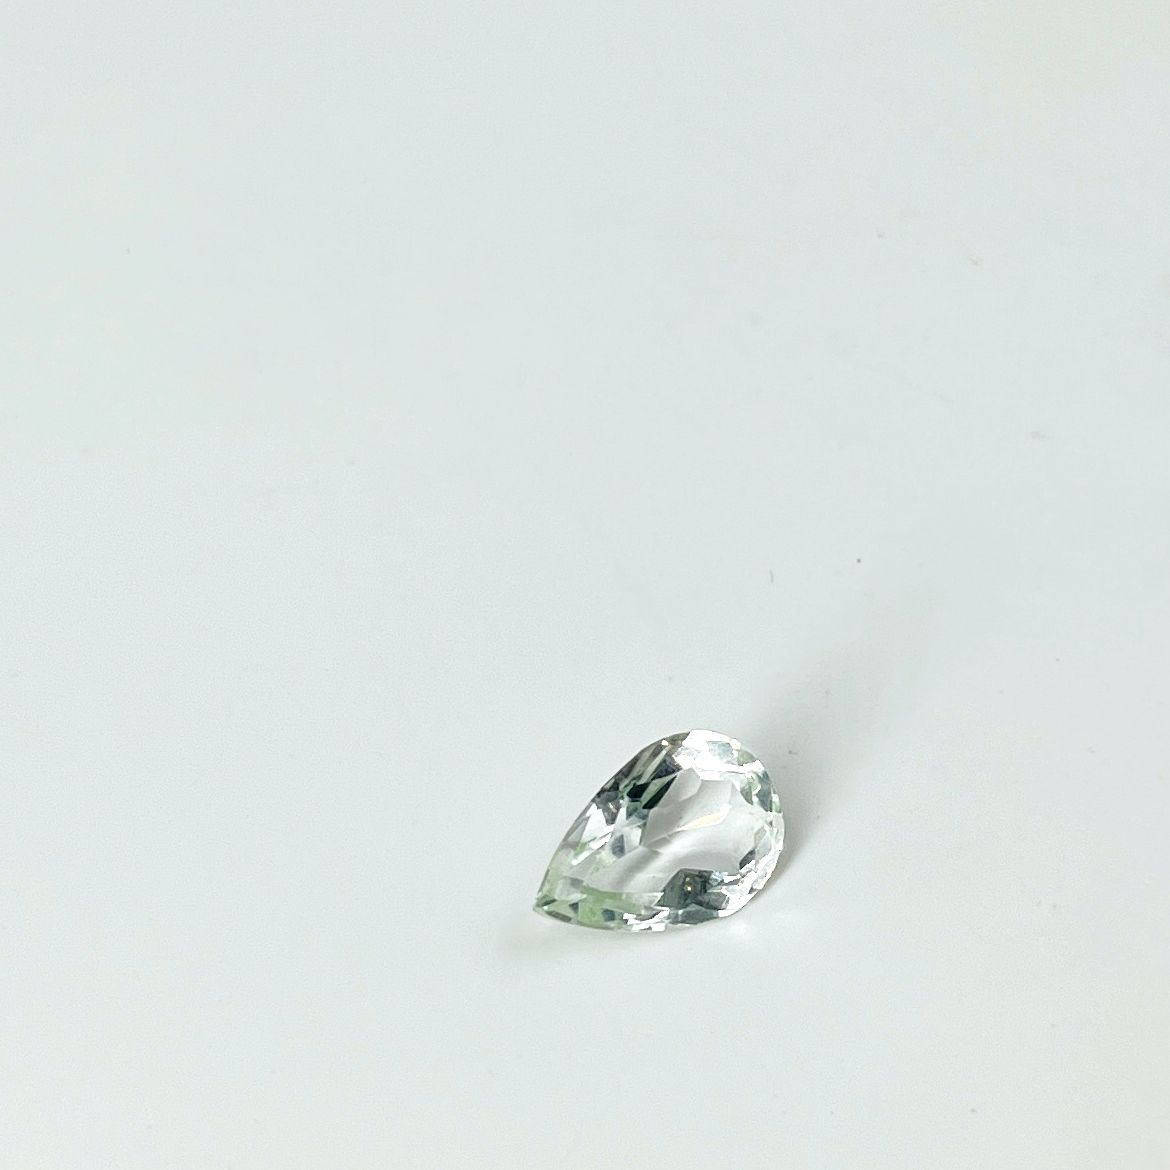 Null Topaze incolore taille poire pesant 5.27 cts Dimensions: 1,4 x 0.9 cm